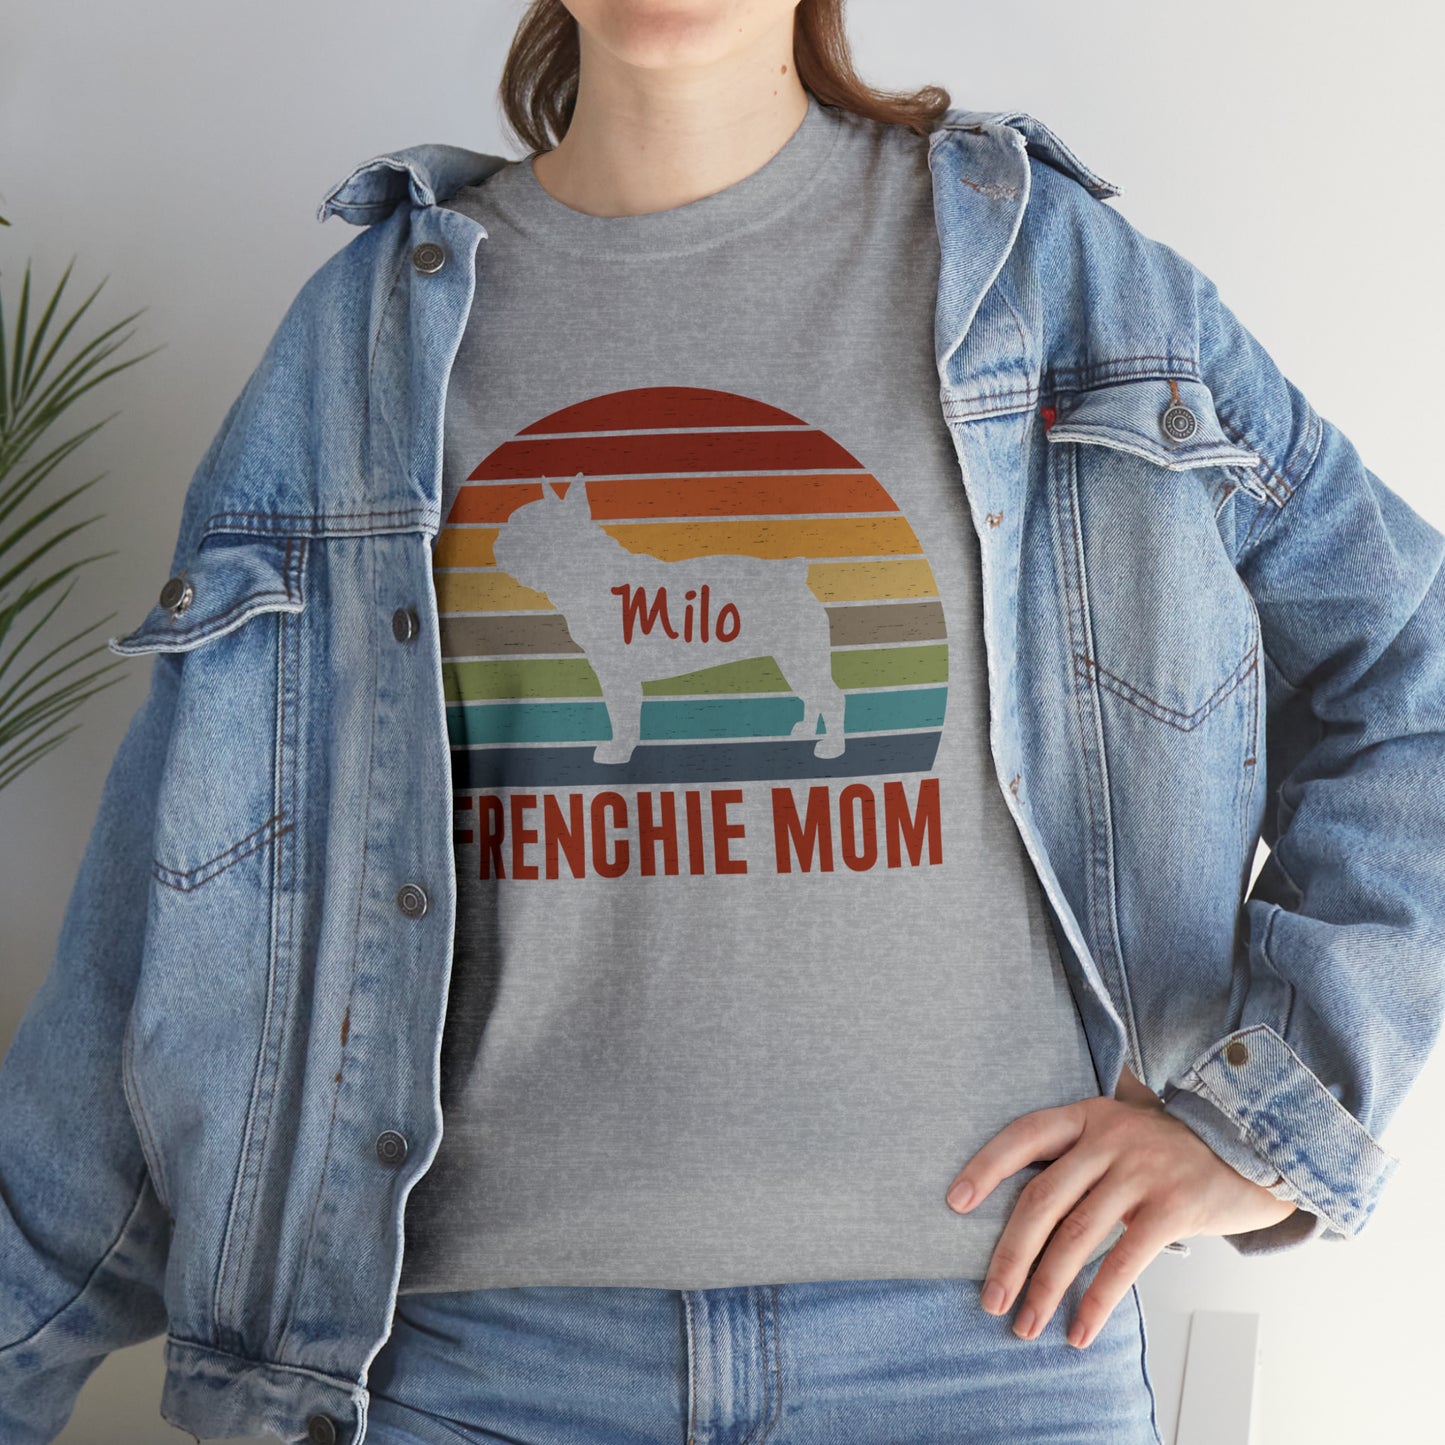 Frenchie Mom - Custom T-shirt with Frenchie Name